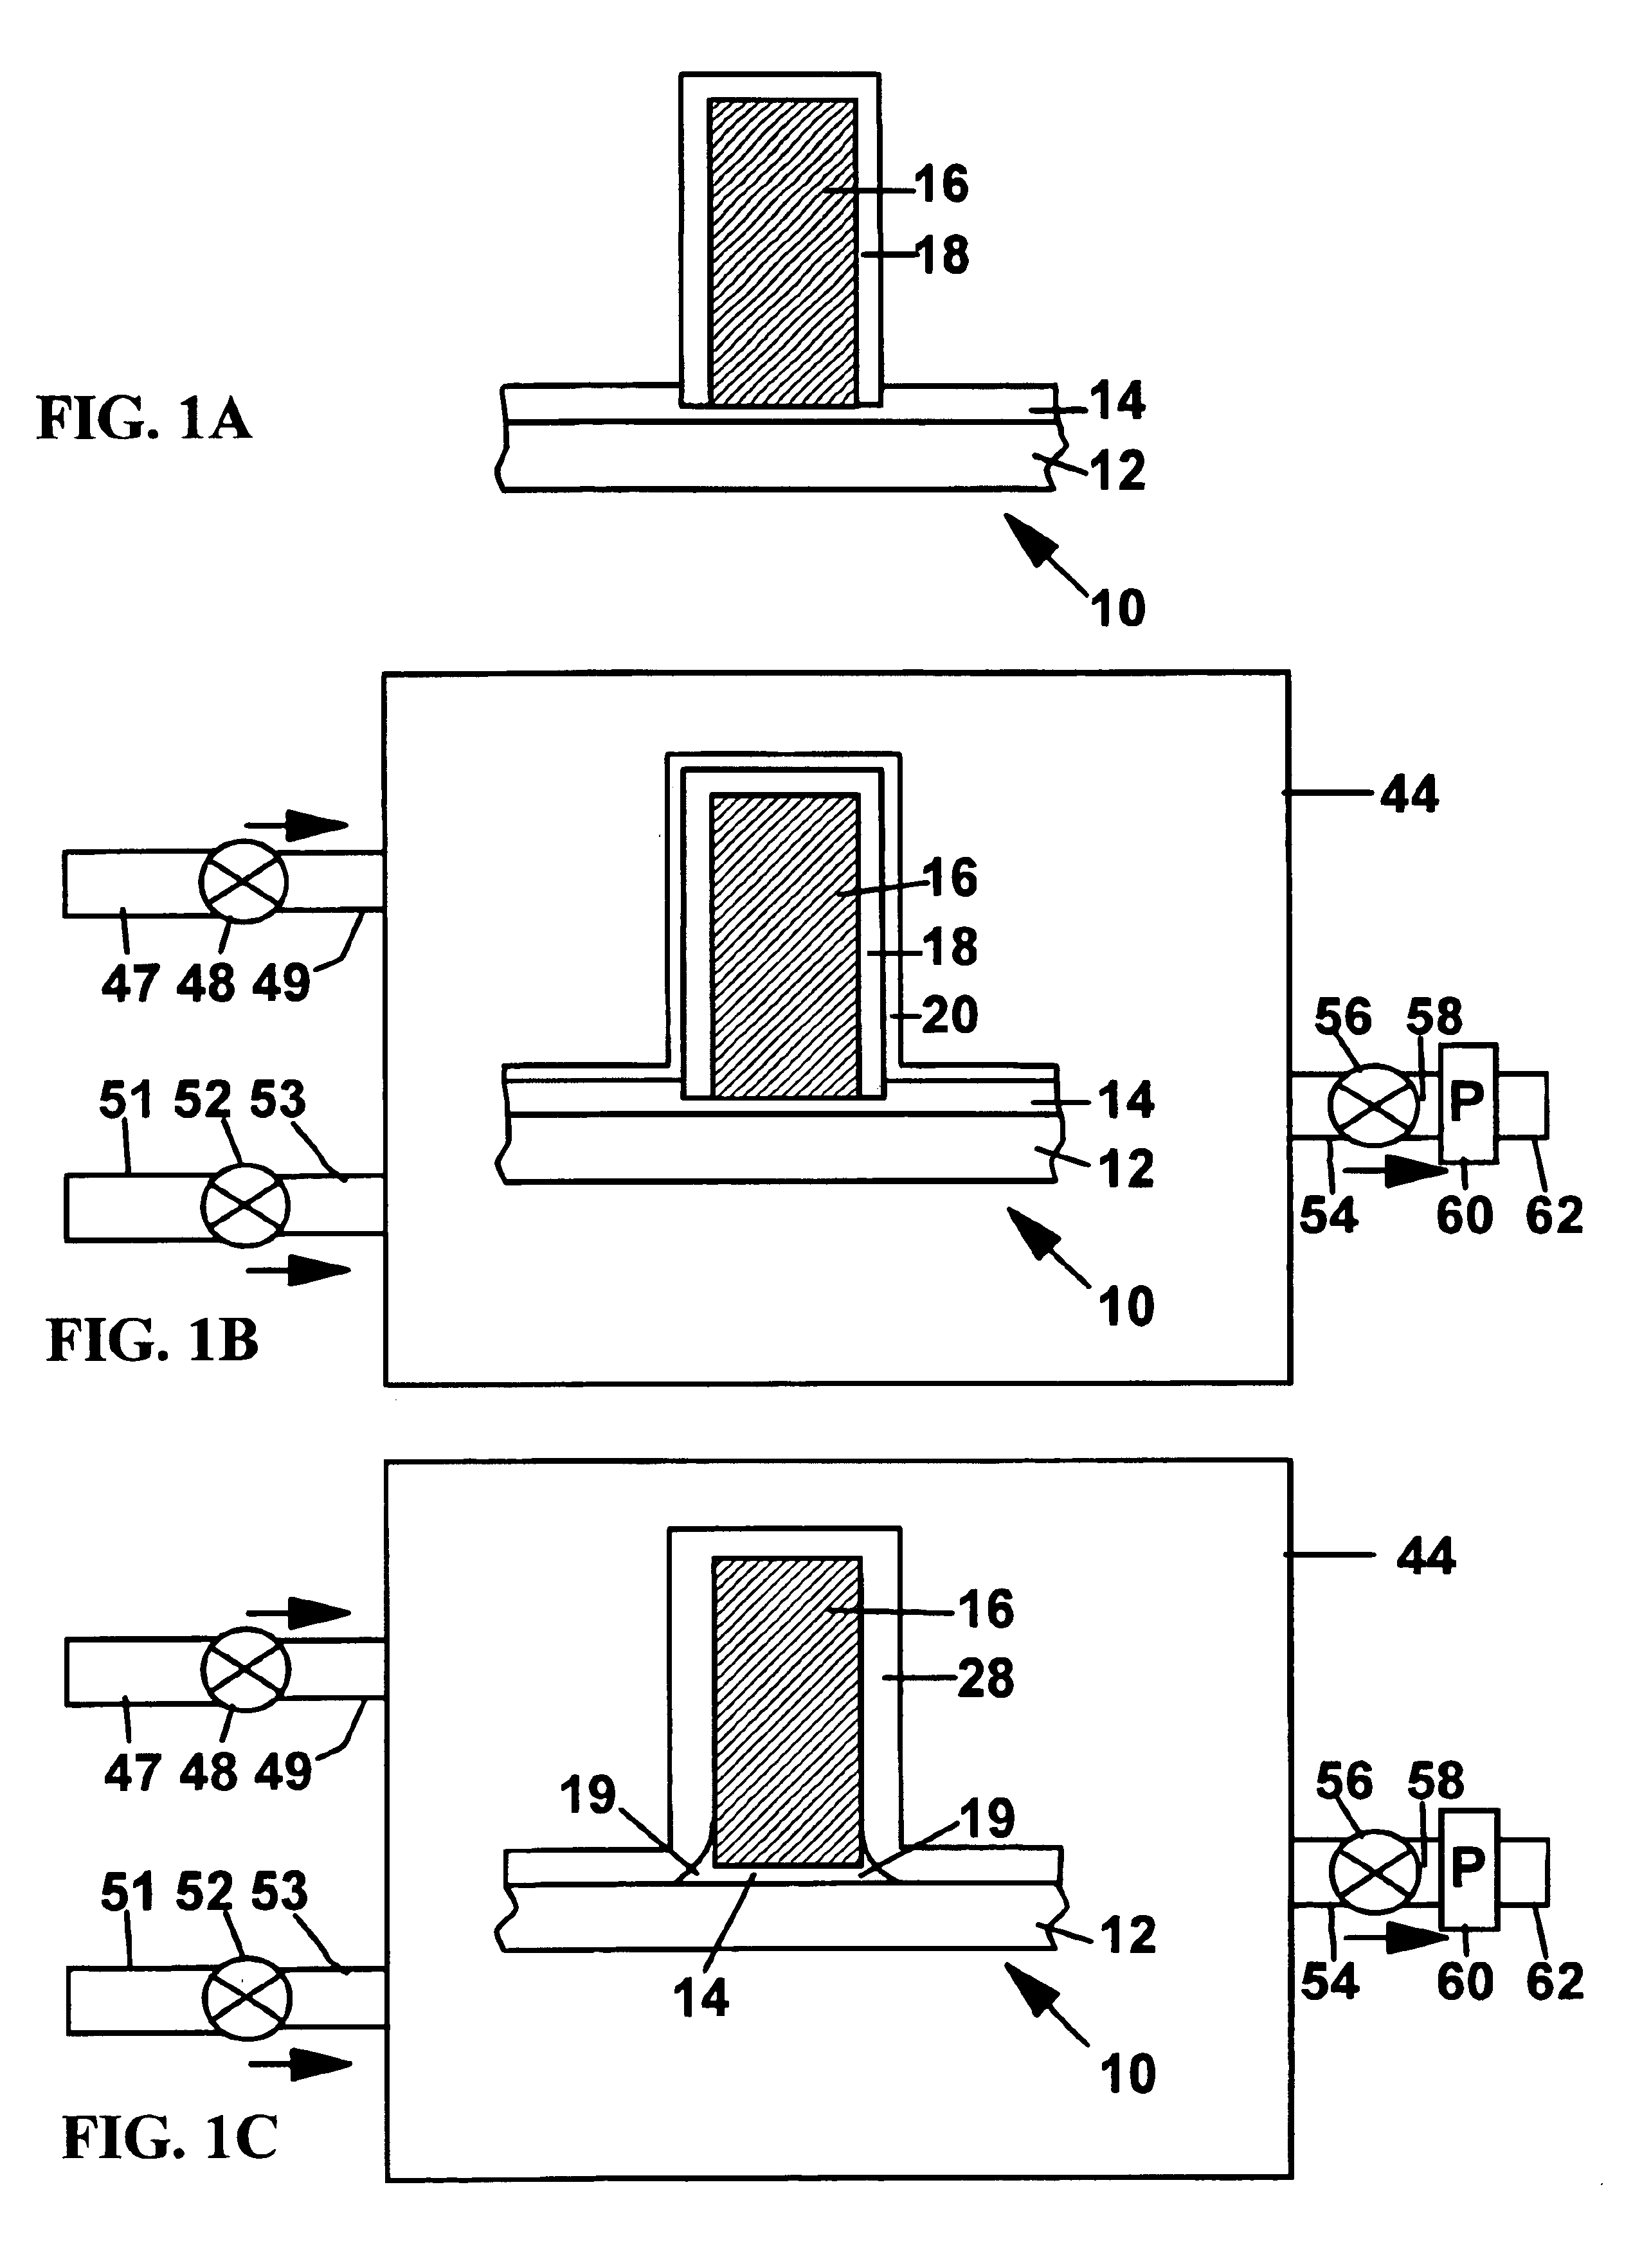 MOSFET device with in-situ doped, raised source and drain structures